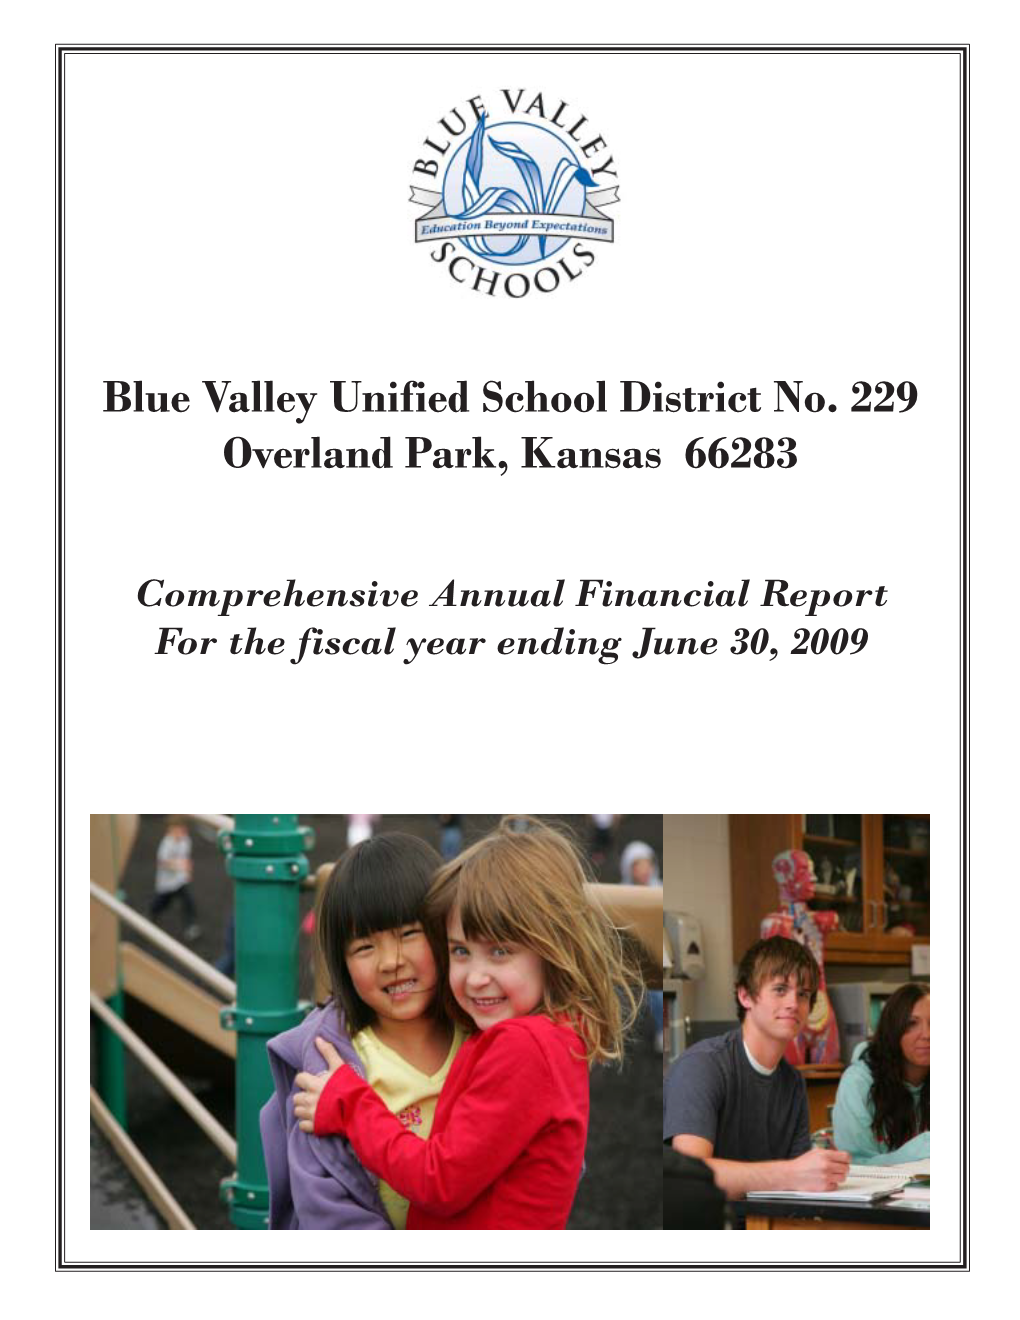 Blue Valley Unified School District No. 229 Overland Park, Kansas 66283